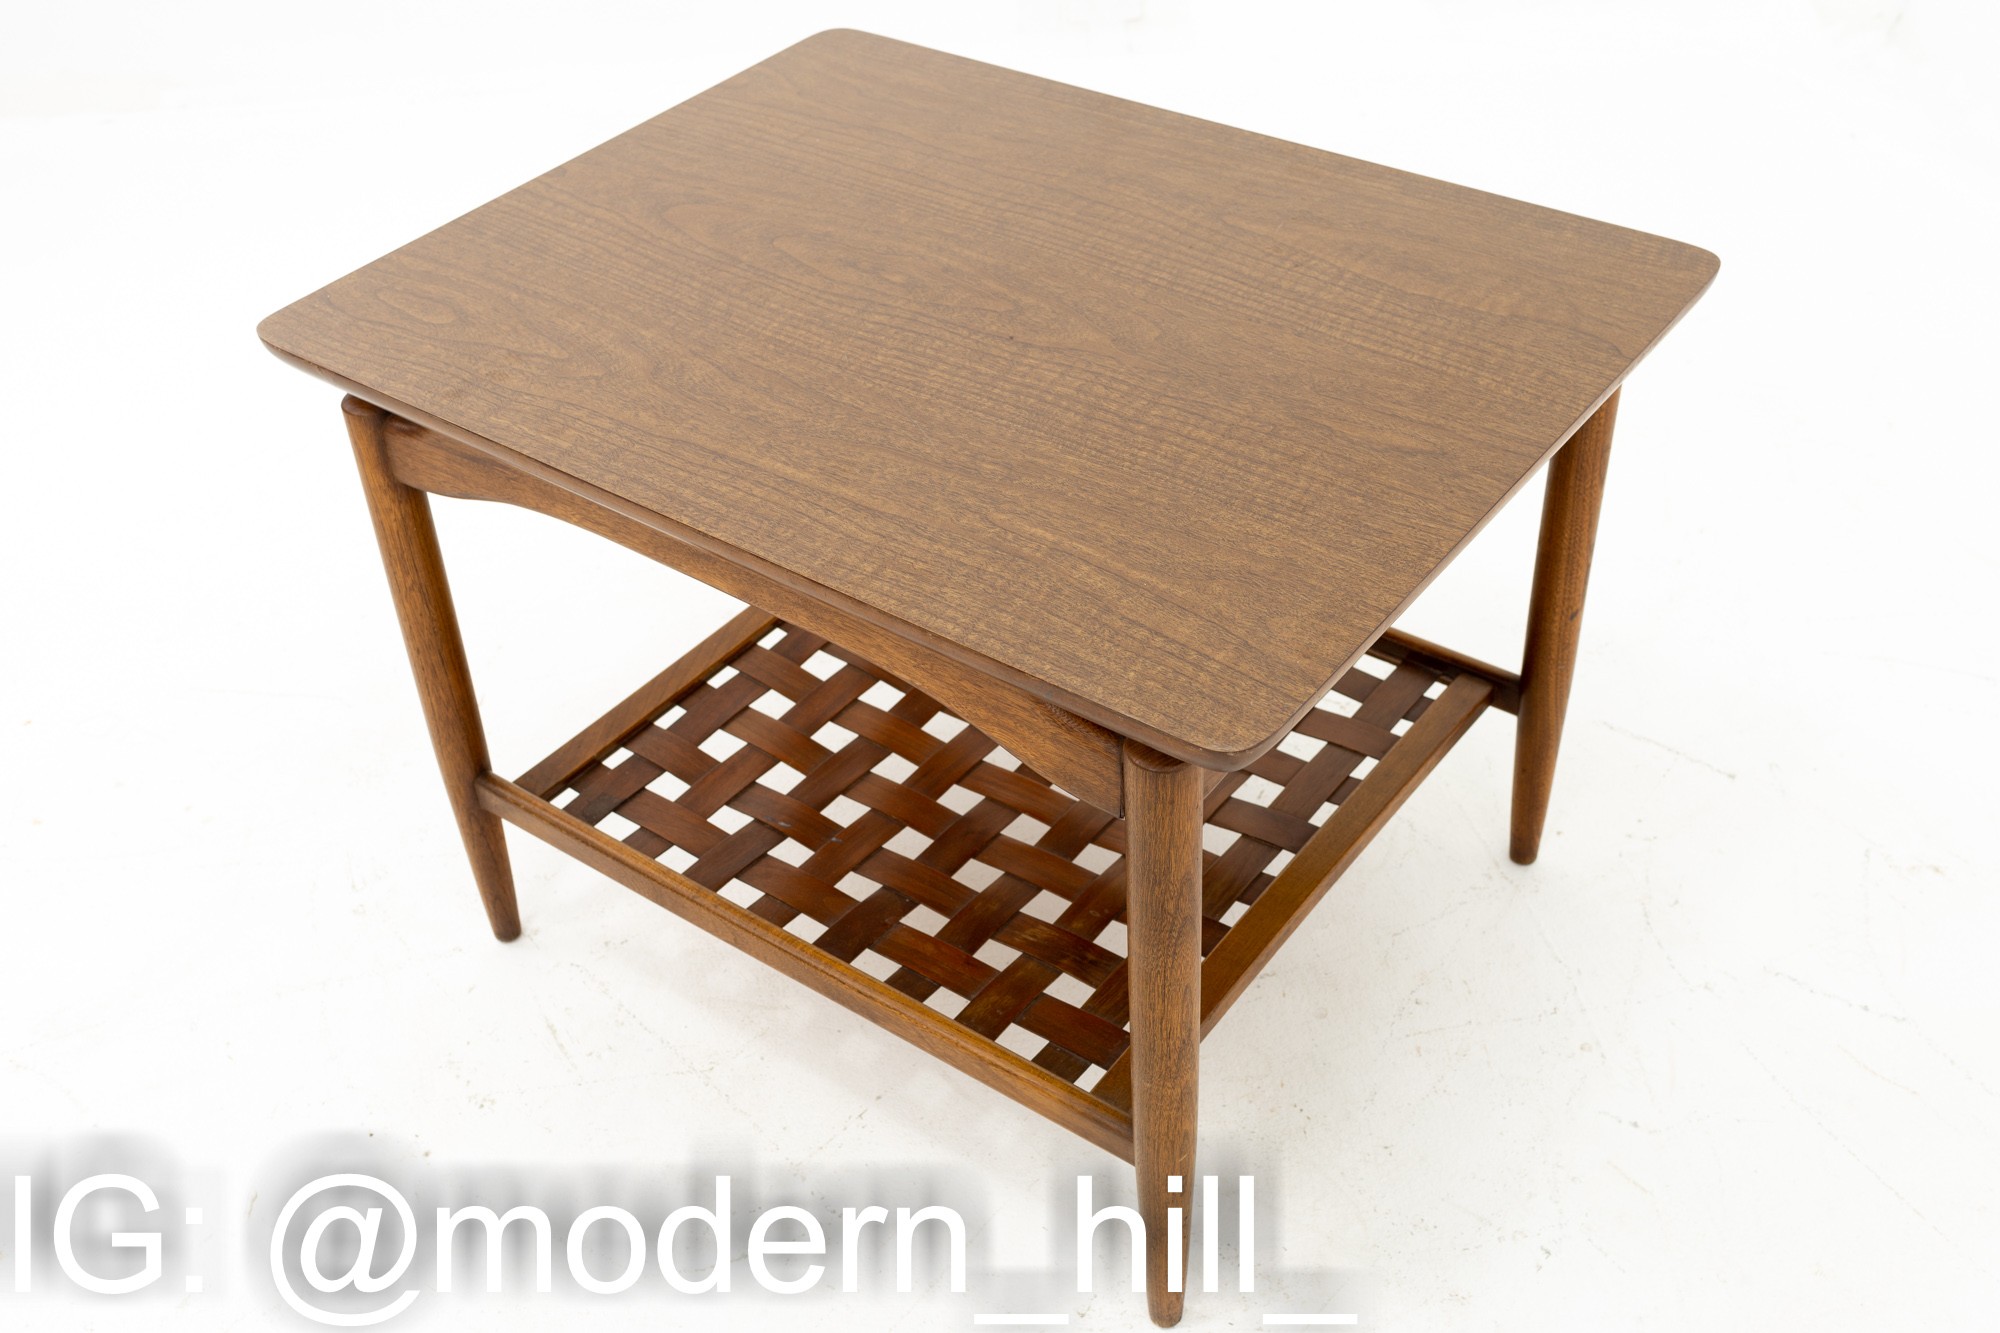 Greta Magnusson Grossman Style Mid Century Walnut & Formica Top Side End Tables - Pair